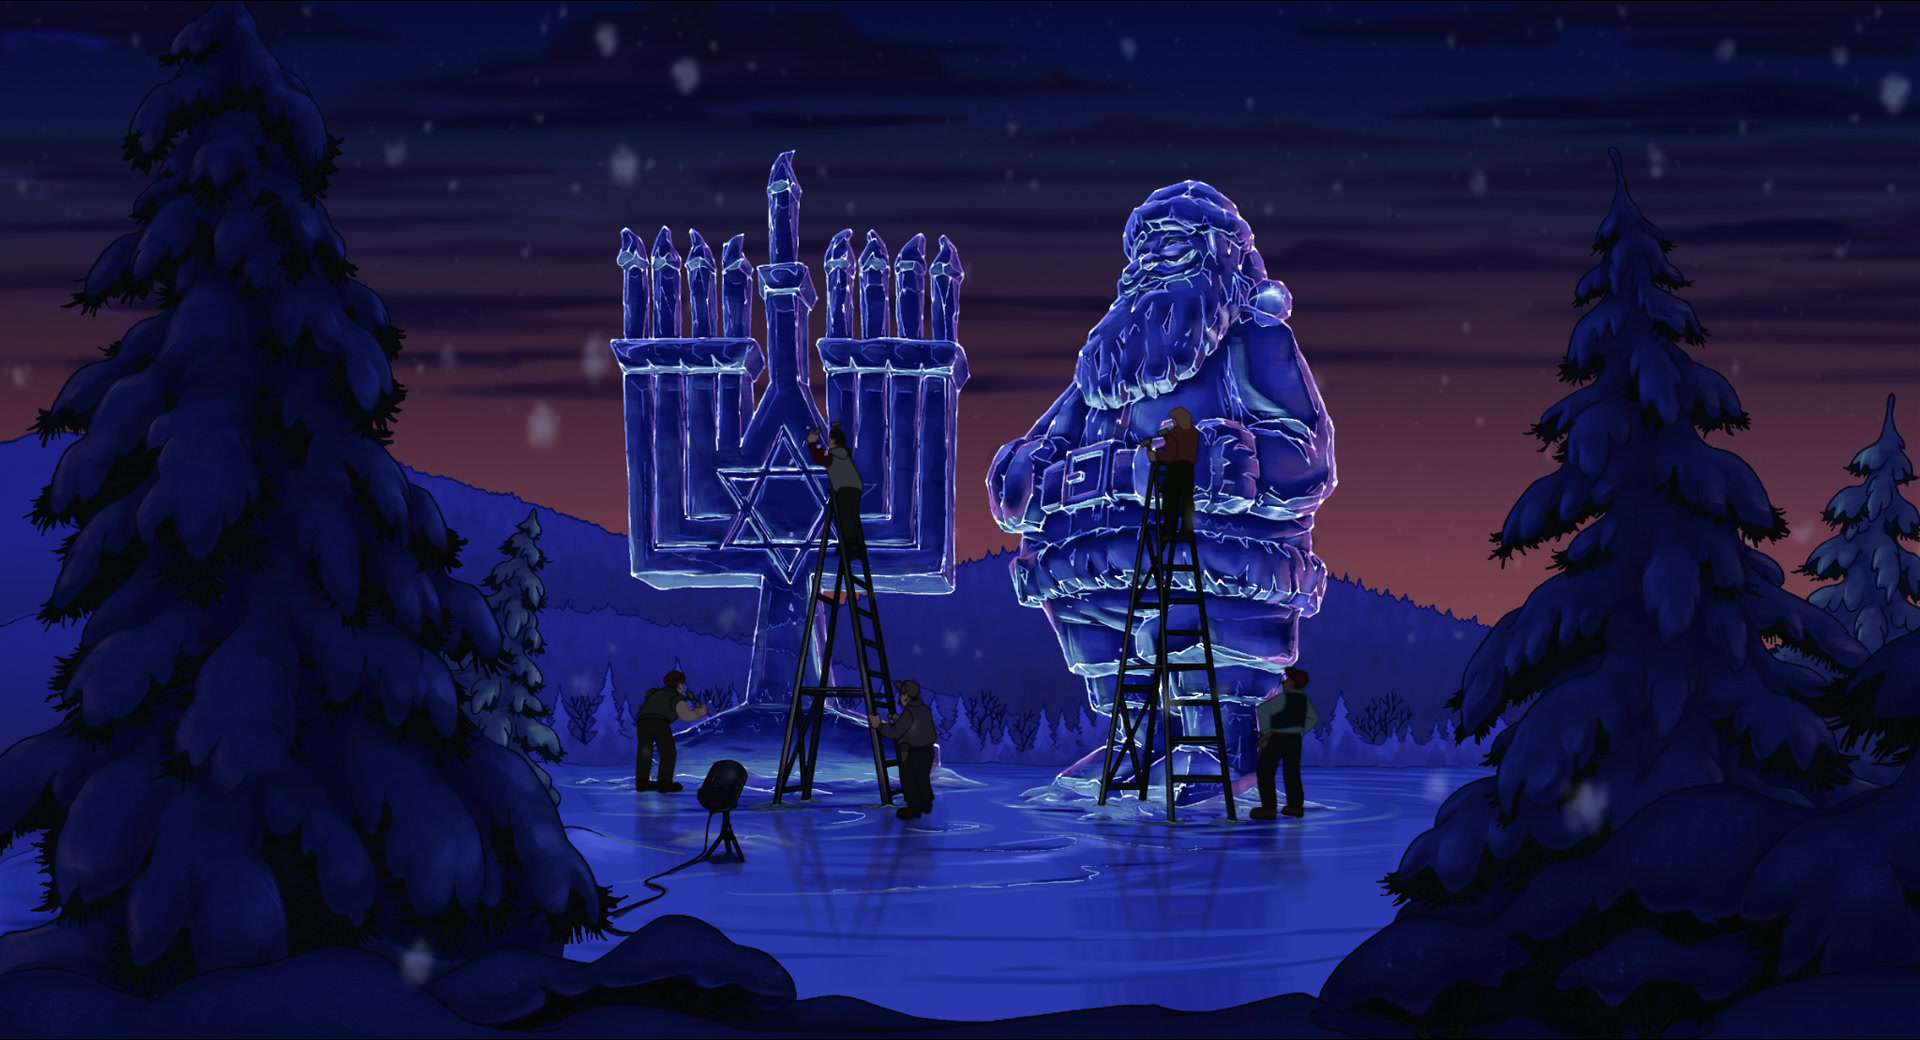 Workers create Santa Claus and menorah ice sculptures in this photo from Happy Madison Productions.